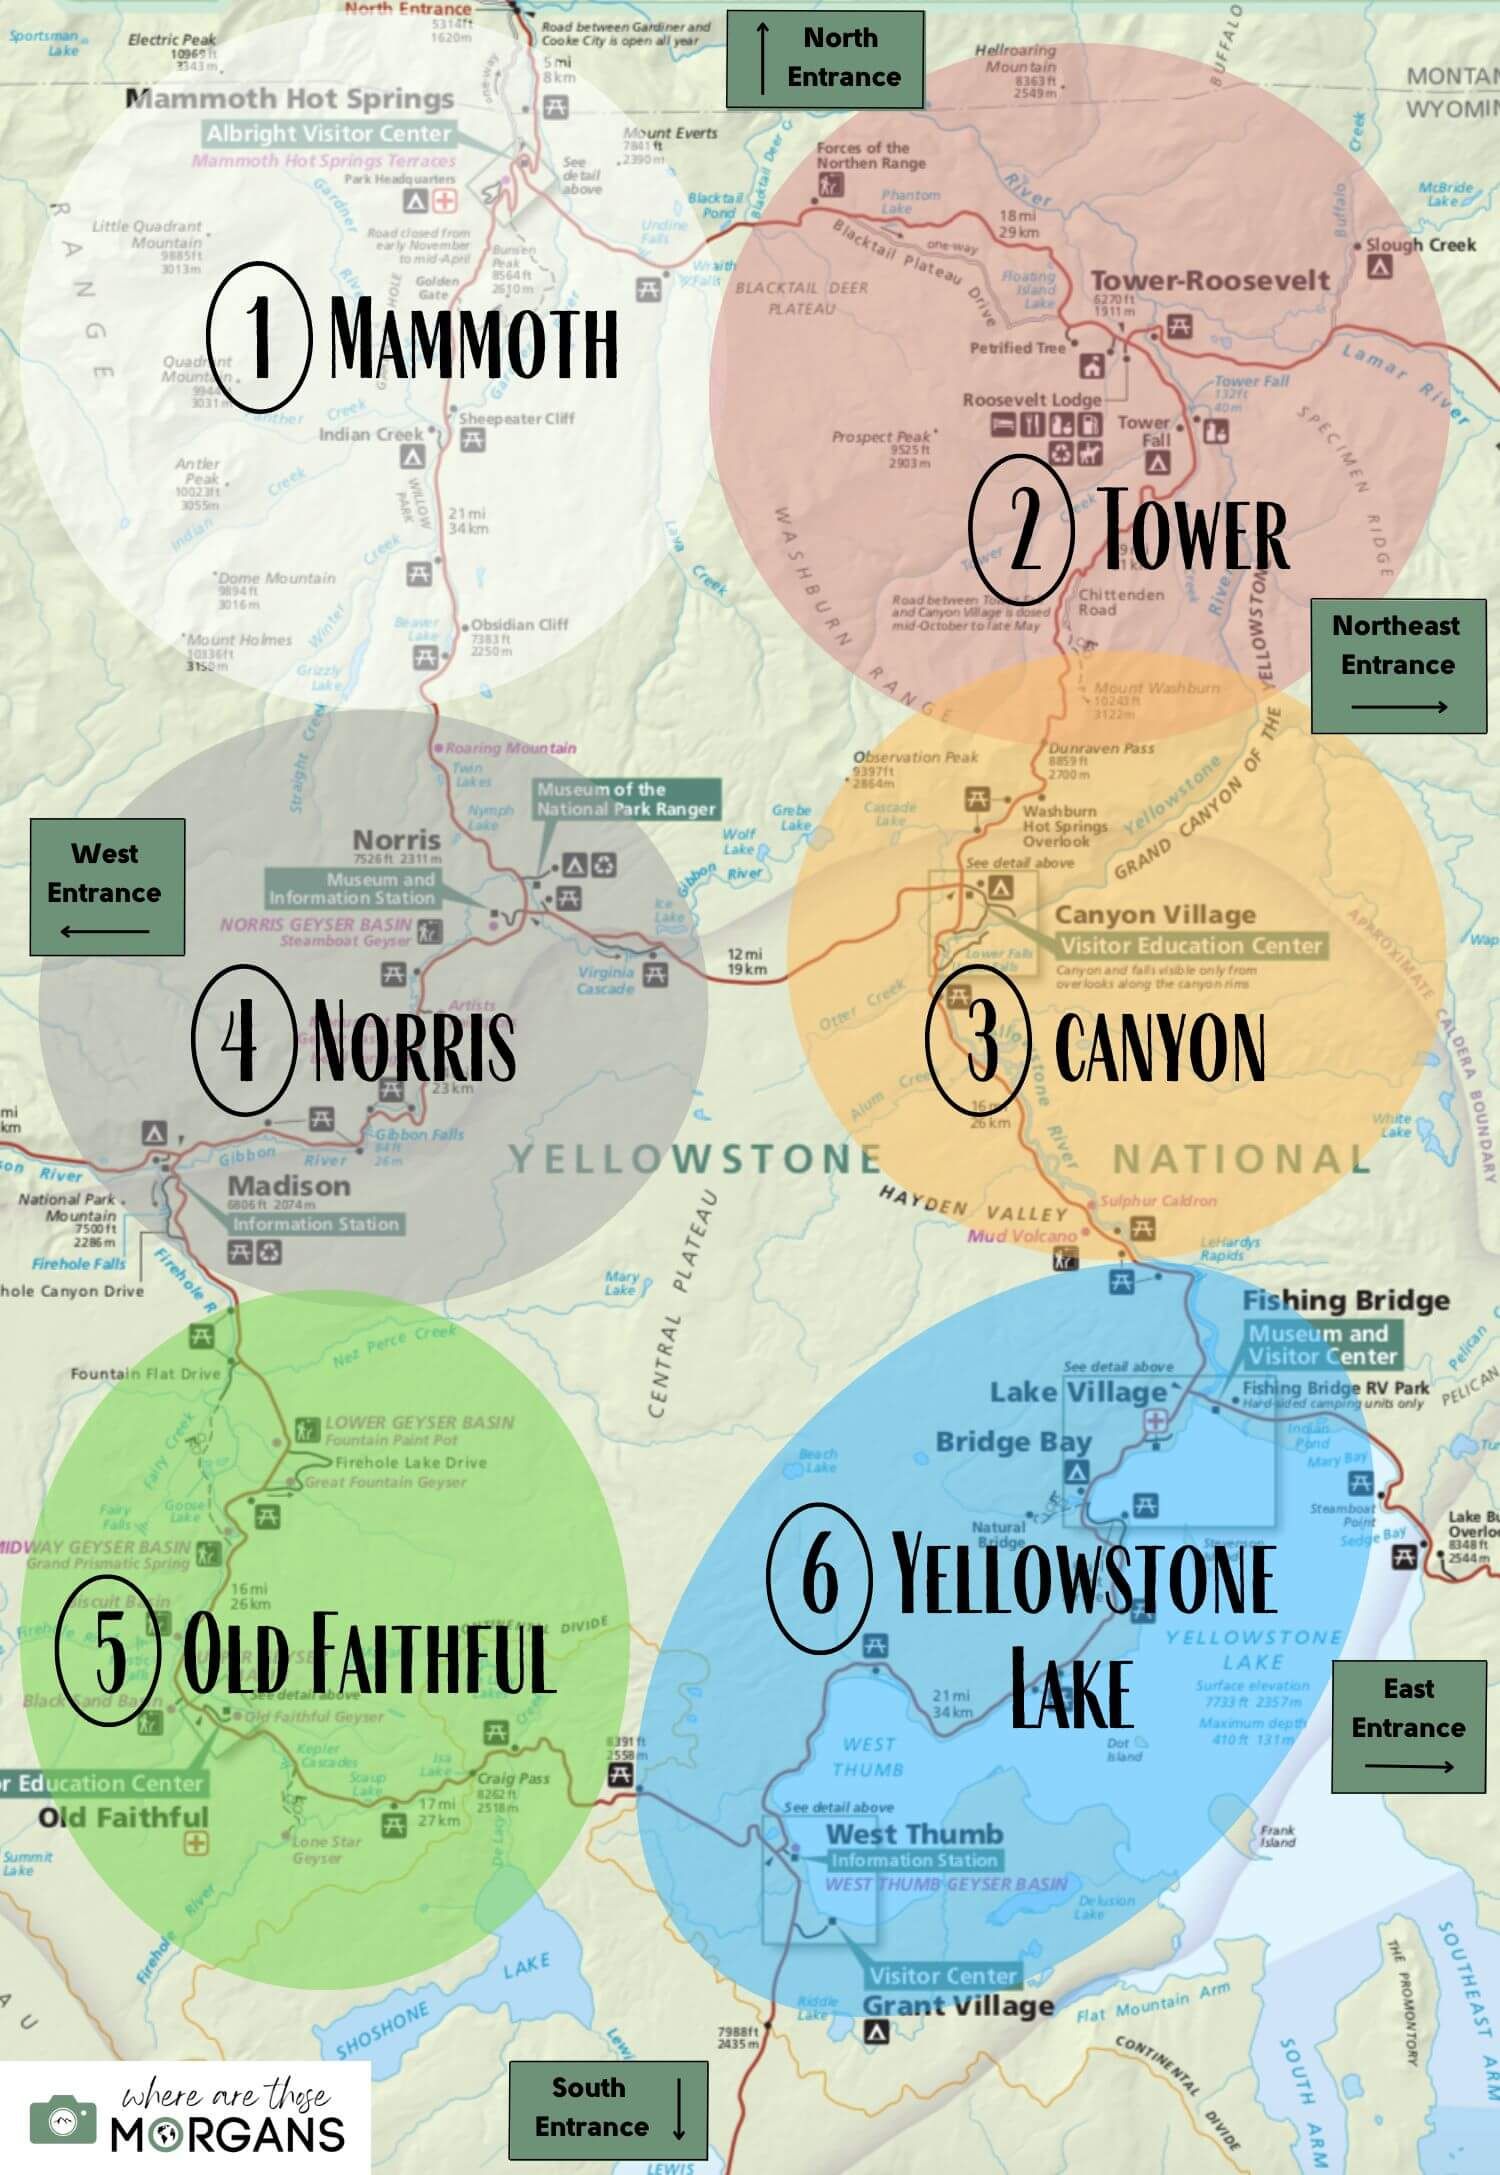 Map of Yellowstone broken down into 6 regions Mammoth, Tower, Canyon, Norris, Old Faithful and Yellowstone Lake, also showing directions to the 5 entrances.